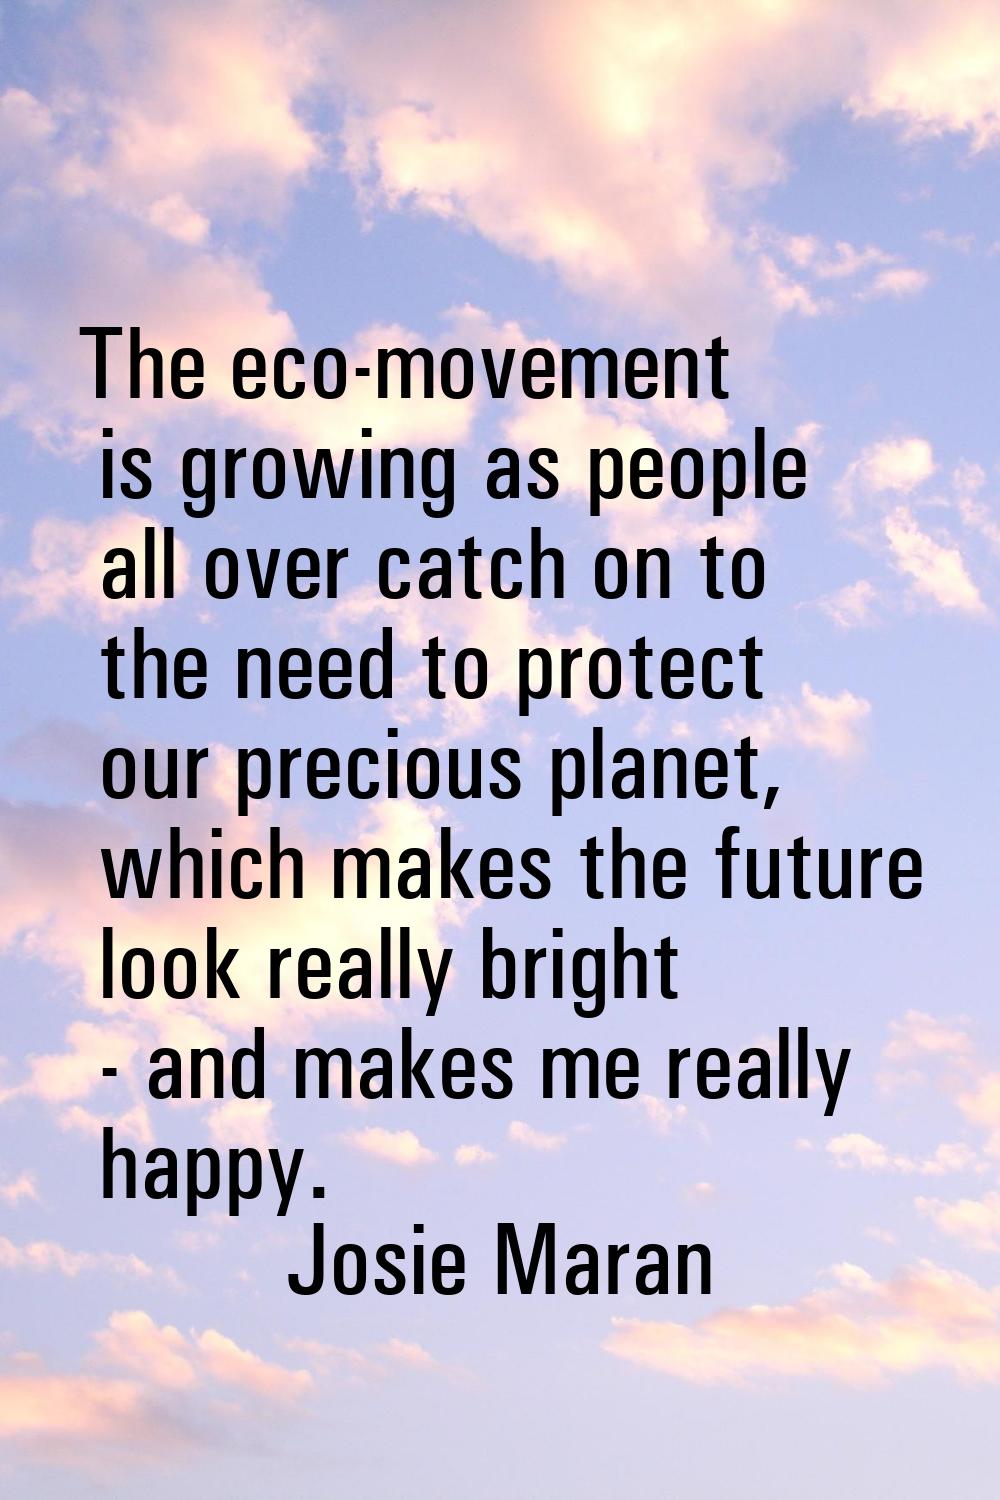 The eco-movement is growing as people all over catch on to the need to protect our precious planet,